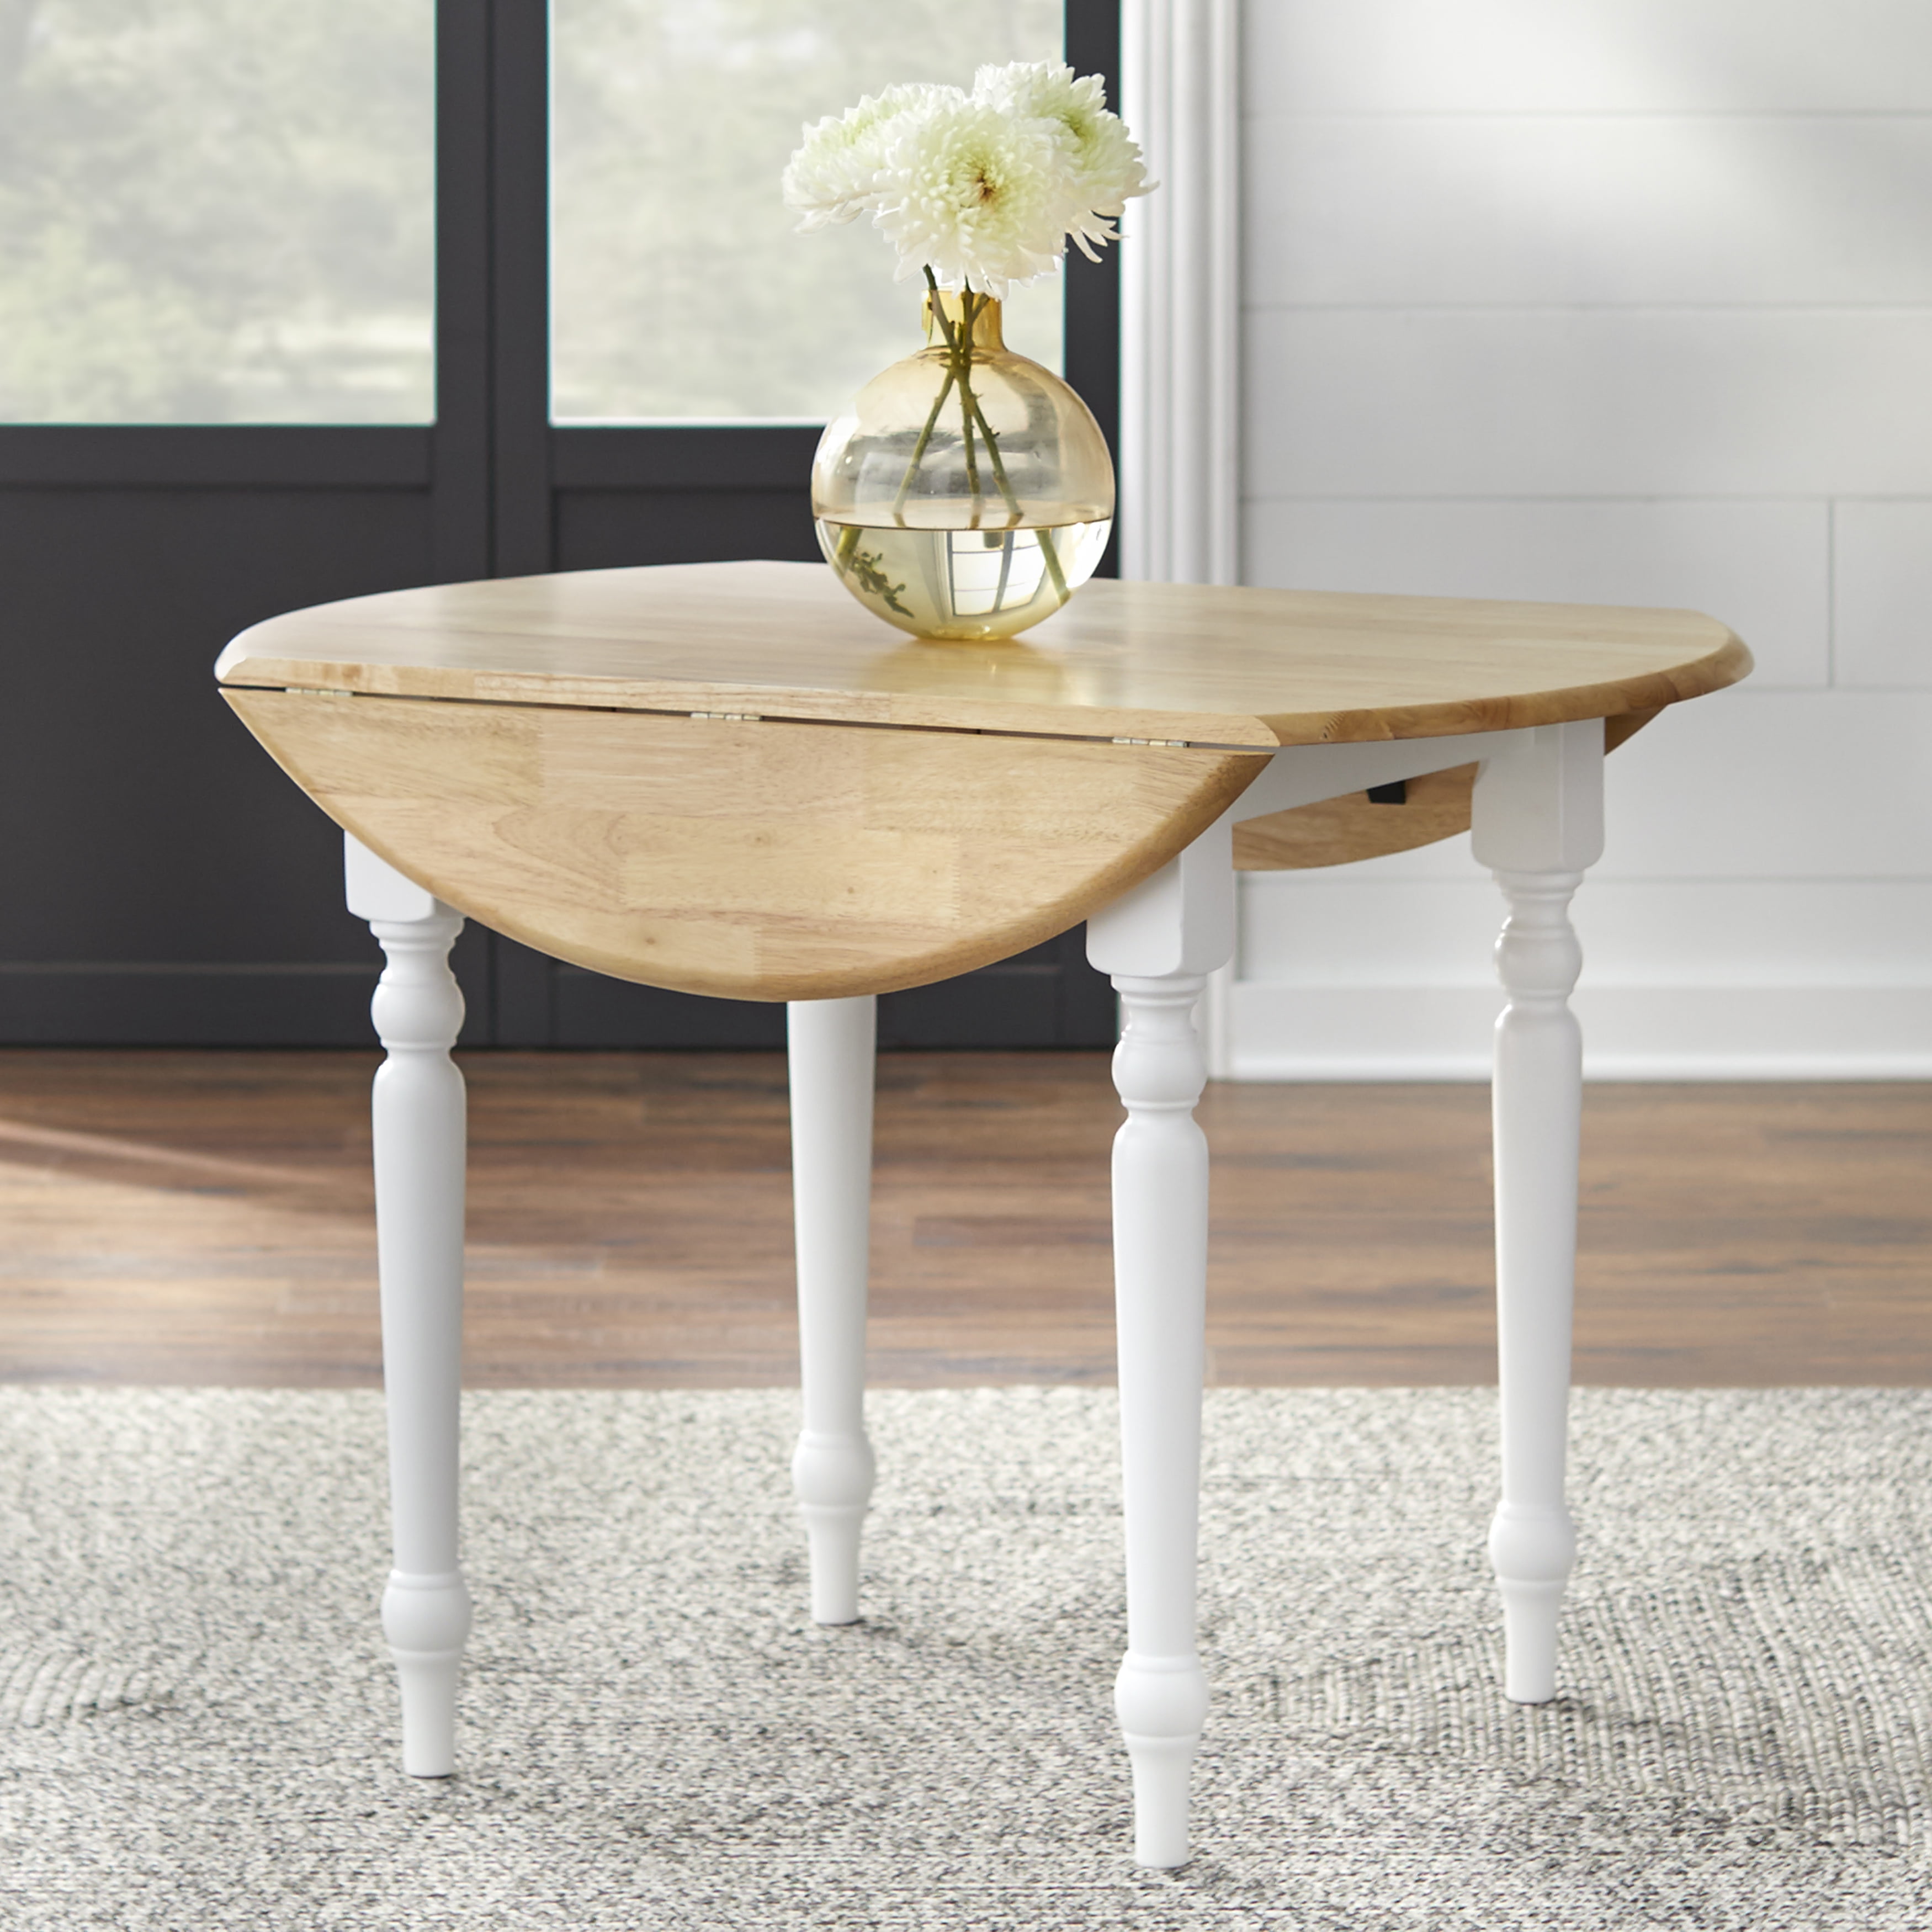 Tms Round Drop Leaf Dining Table